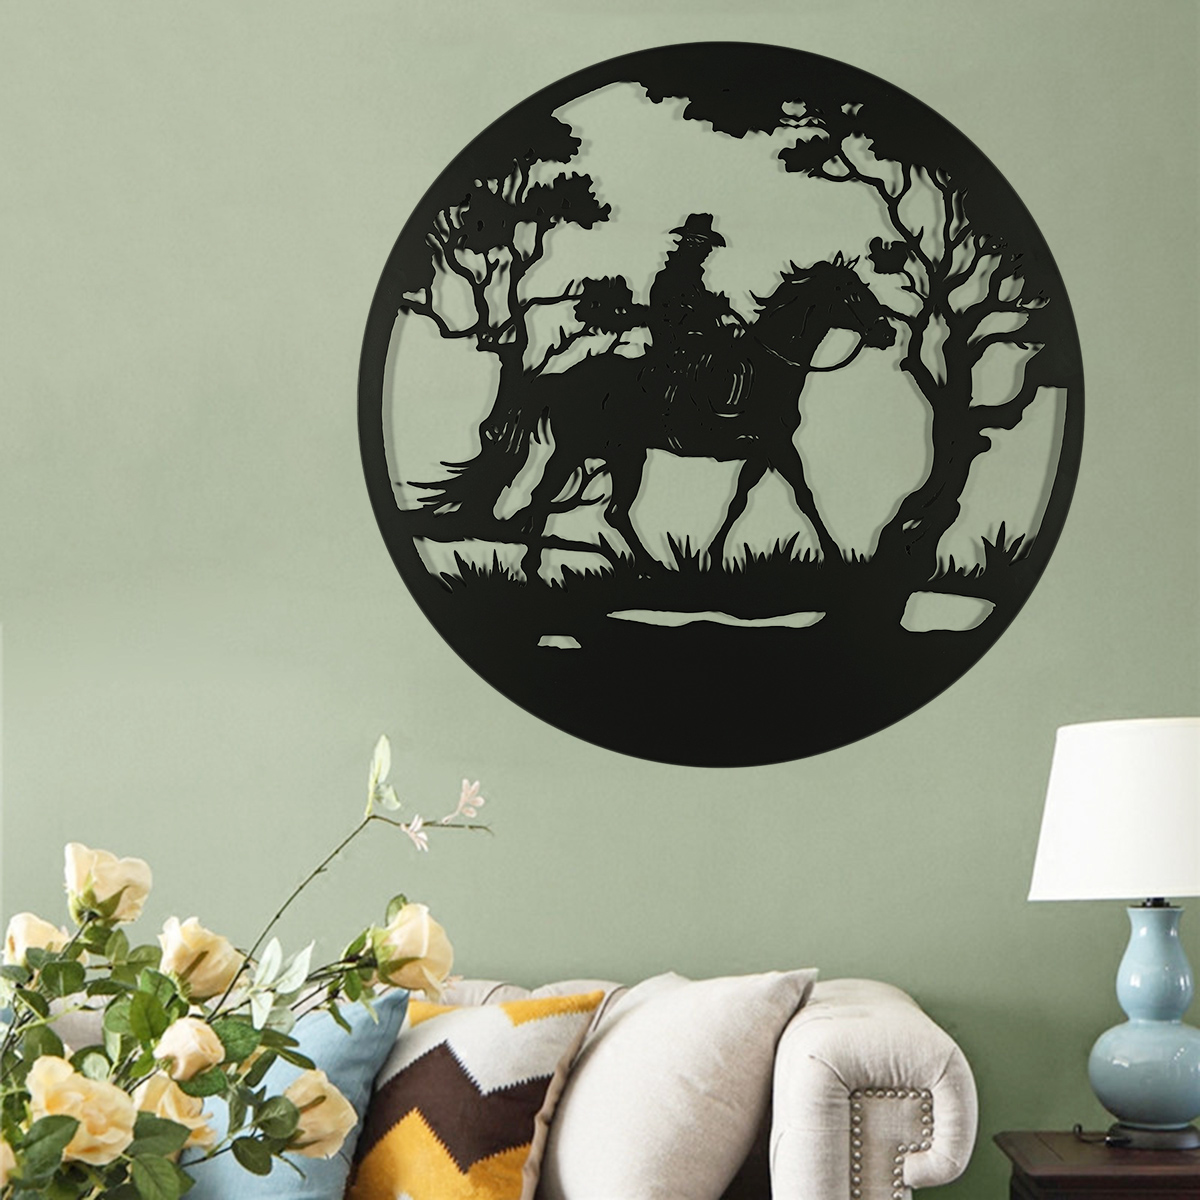 Man-Riding-Horse-In-Forest-Round-Black-Metal-Wall-Hanging-Art-Decoration-Room-1794308-2